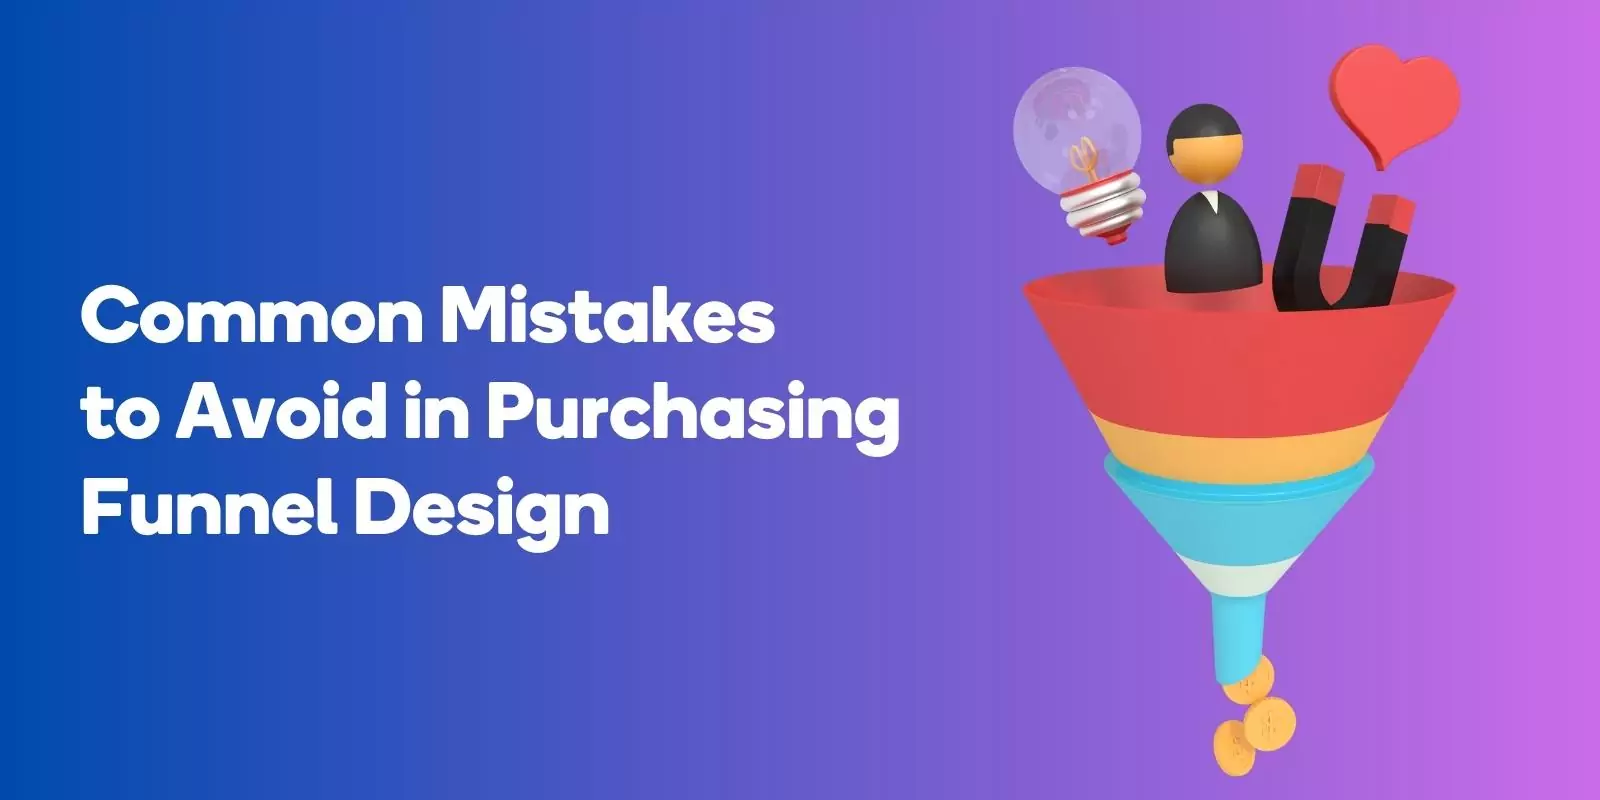 Common Mistakes to Avoid in Purchasing Funnel Design